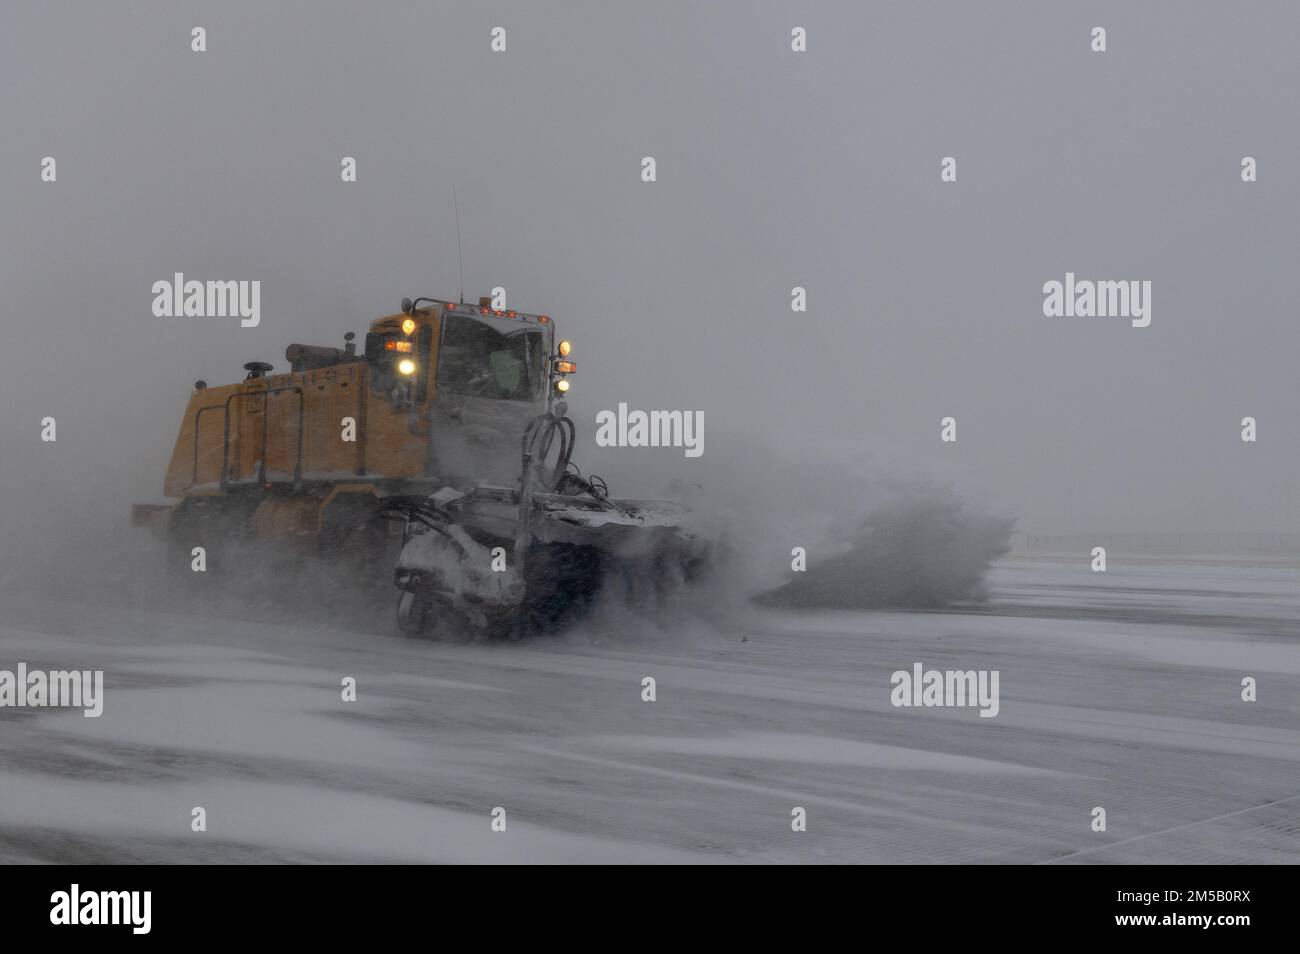 The 22nd Civil Engineering Squadron’s snow removal team clears snow from the flight line Feb. 17, 2022, at McConnell Air Force Base, Kansas. The snow removal team uses a combination of snow plows and brushes to ensure aerial operations can be continue safely. Stock Photo